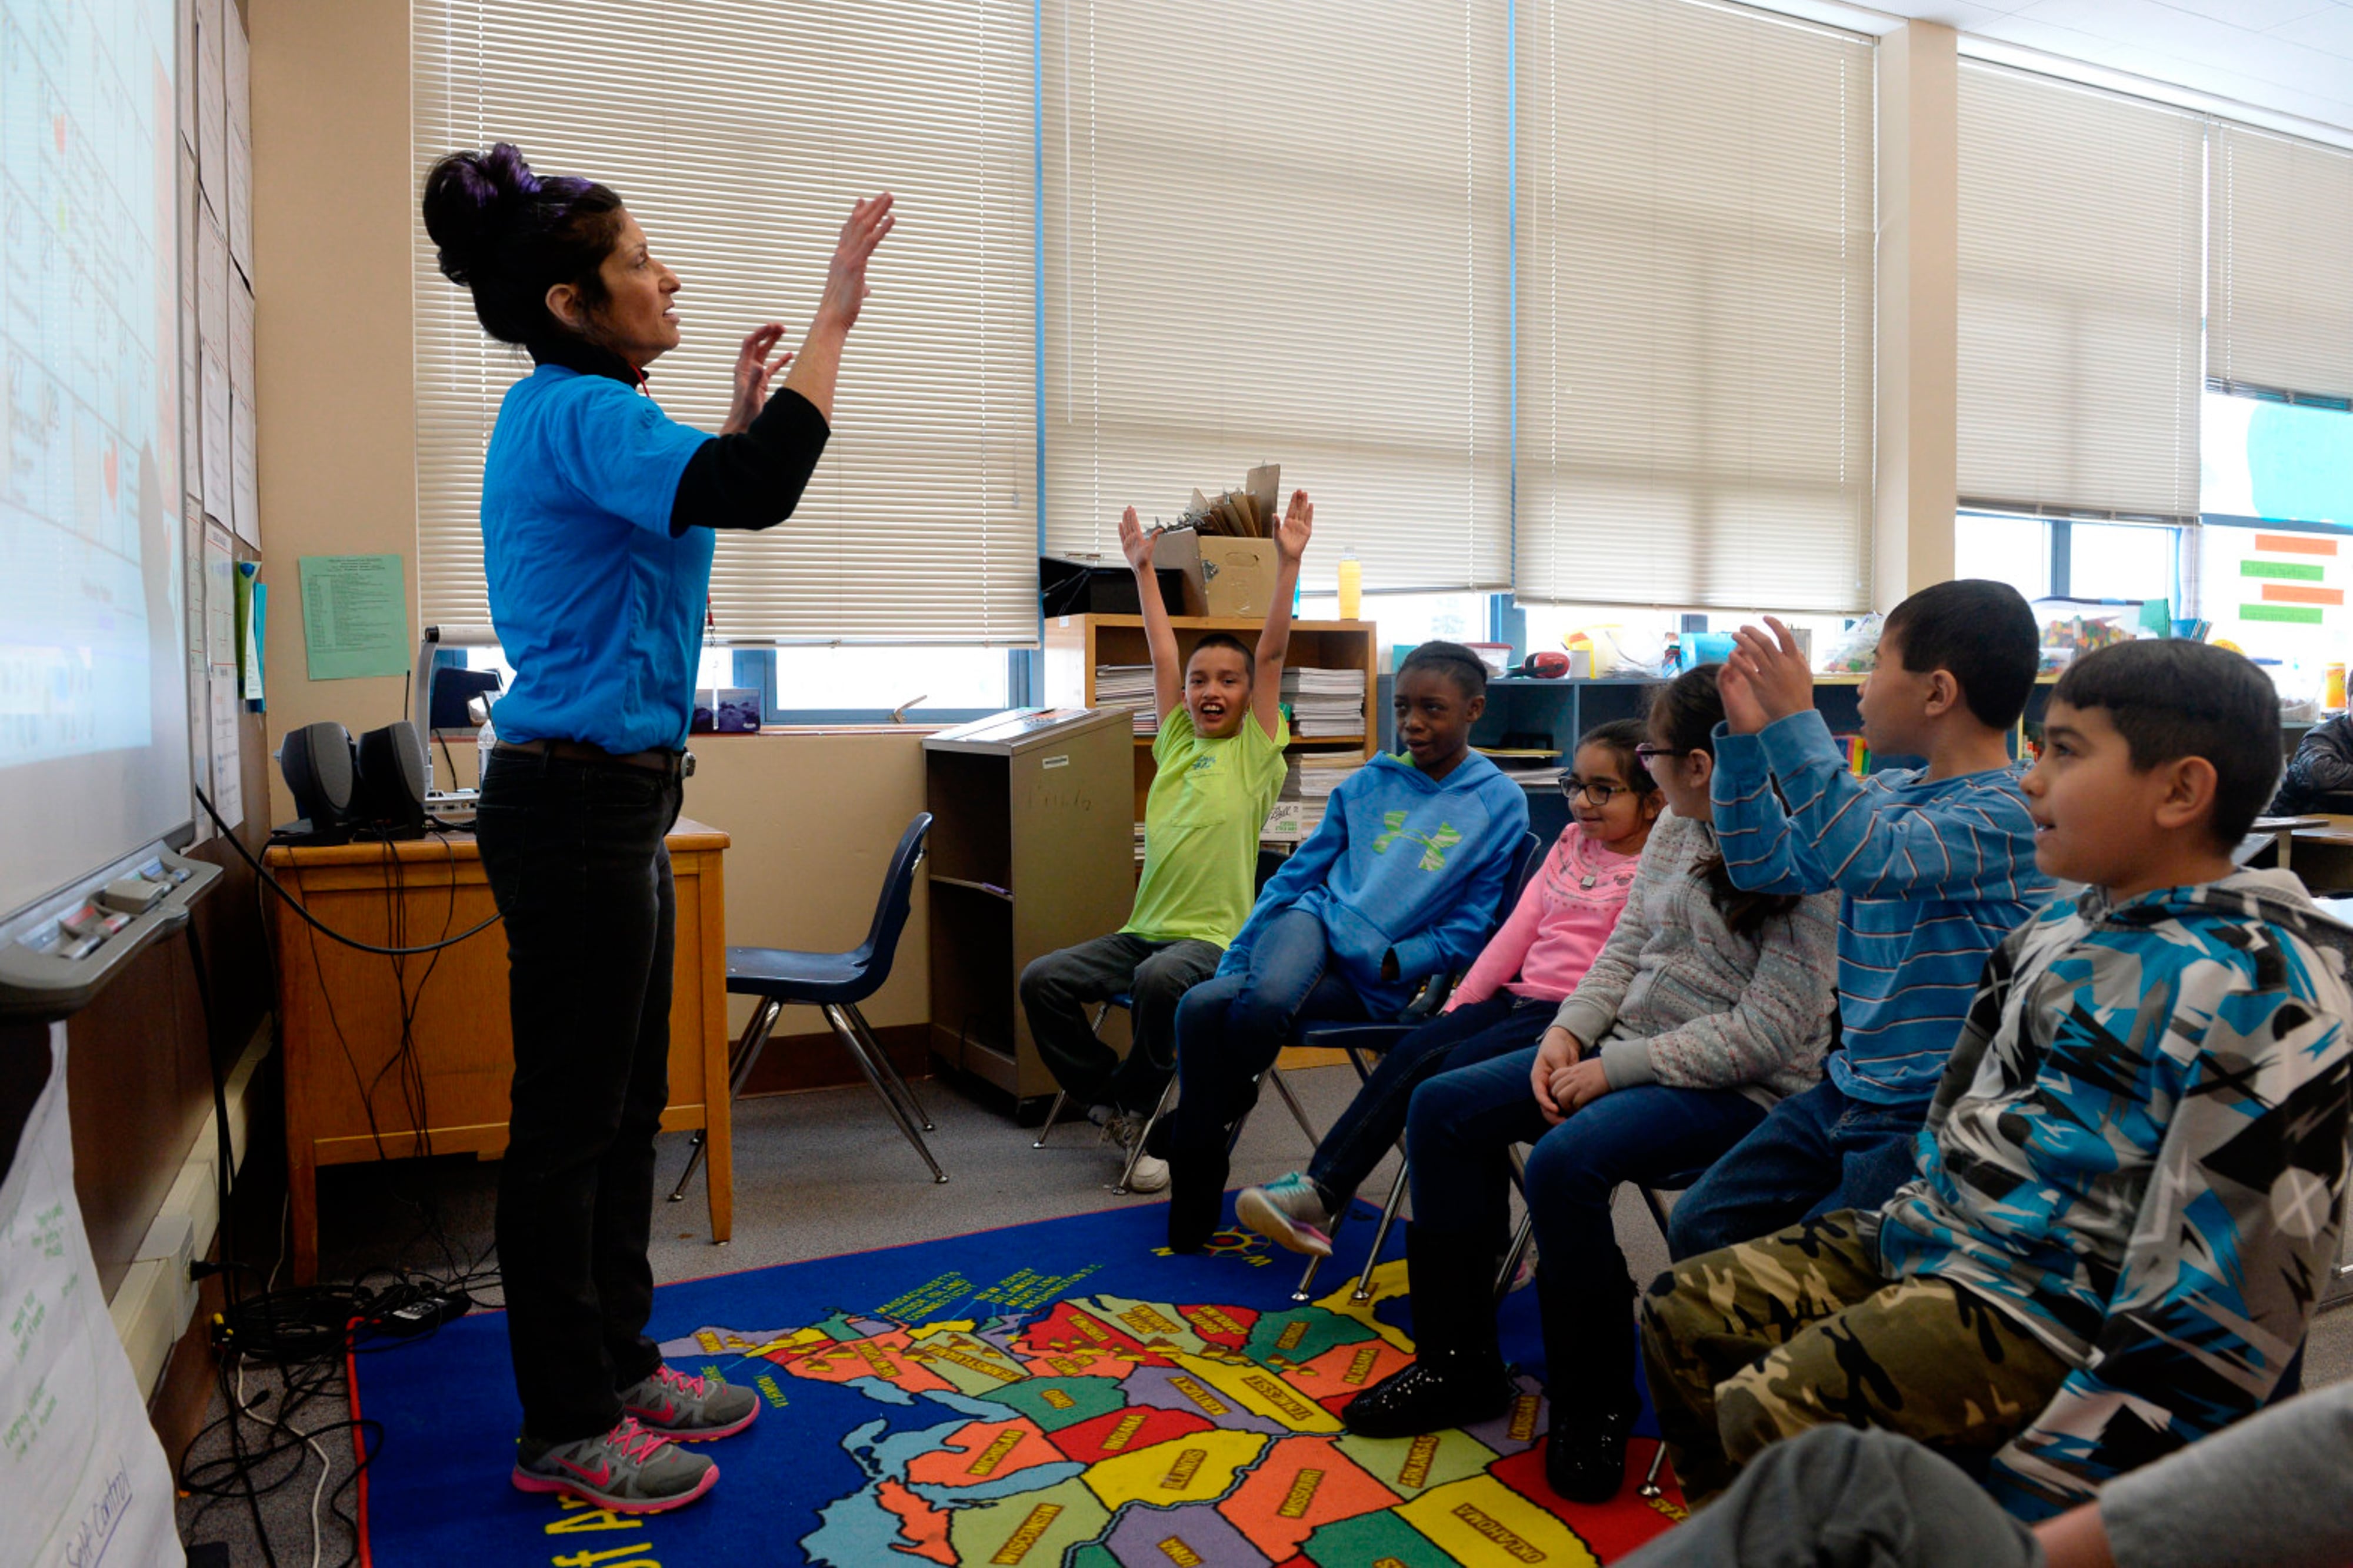 A group of six elementary students sit together and engage with their teacher, standing at the front of the classroom with her arms raised.